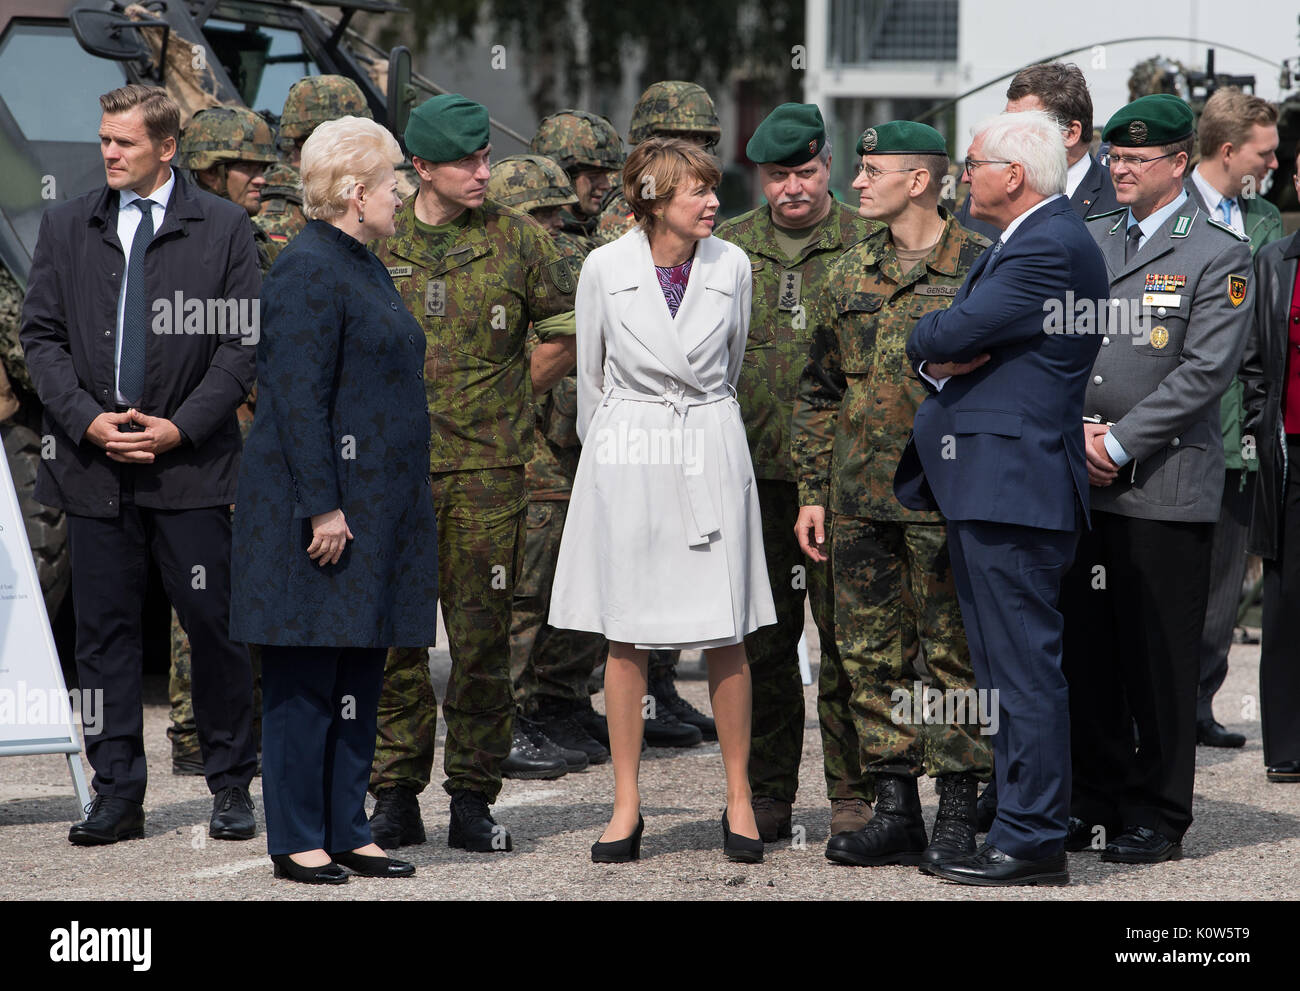 Rukla, Lithuania. 25th Aug, 2017. German President Frank-Walter Steinmeier, his wife Elke Buedenbender (C) and the President of the Republic of Lithuania, Dalia Grybauskaité (L), being shown around by Thorsten Gensler (3rd from right), Commander of NATO's Enhanced Forward Presence Bataillons, during a visit to the German-led NATO battalion in a military base in Rukla, Lithuania, 25 August 2017. President Steinmeier and his wife are on an official visit to the Baltic states between 22 and 25 August 2017. Photo: Bernd von Jutrczenka/dpa/Alamy Live News Stock Photo